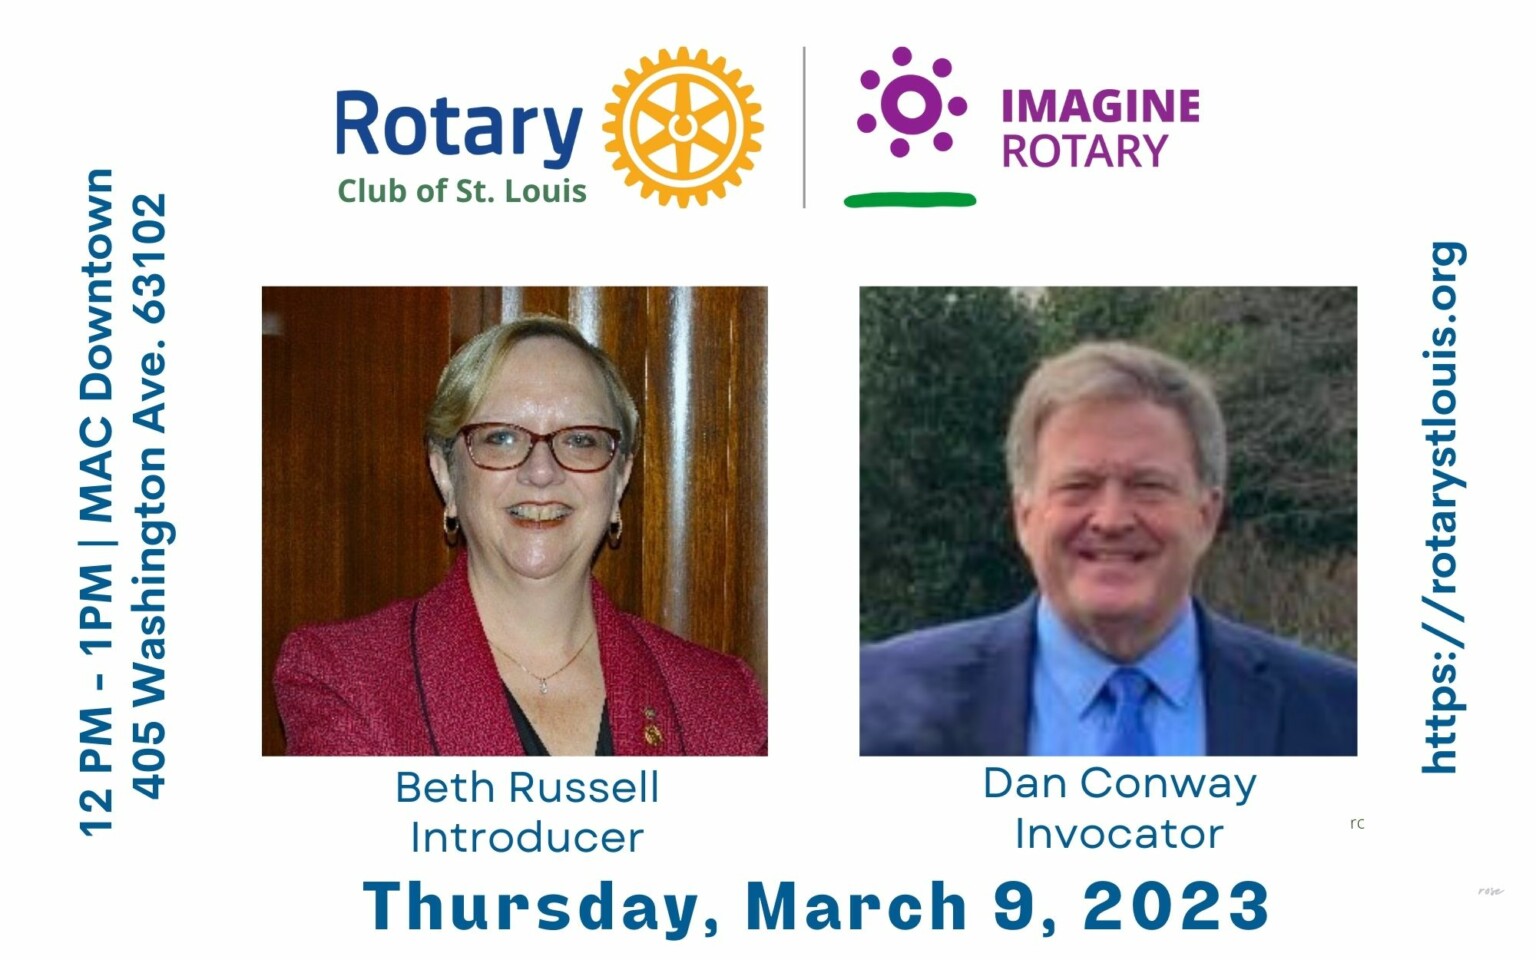 Beth Russell, Introducer and Dan Conway, Invocator on March 9, 2023 at St. Louis Rotary Club